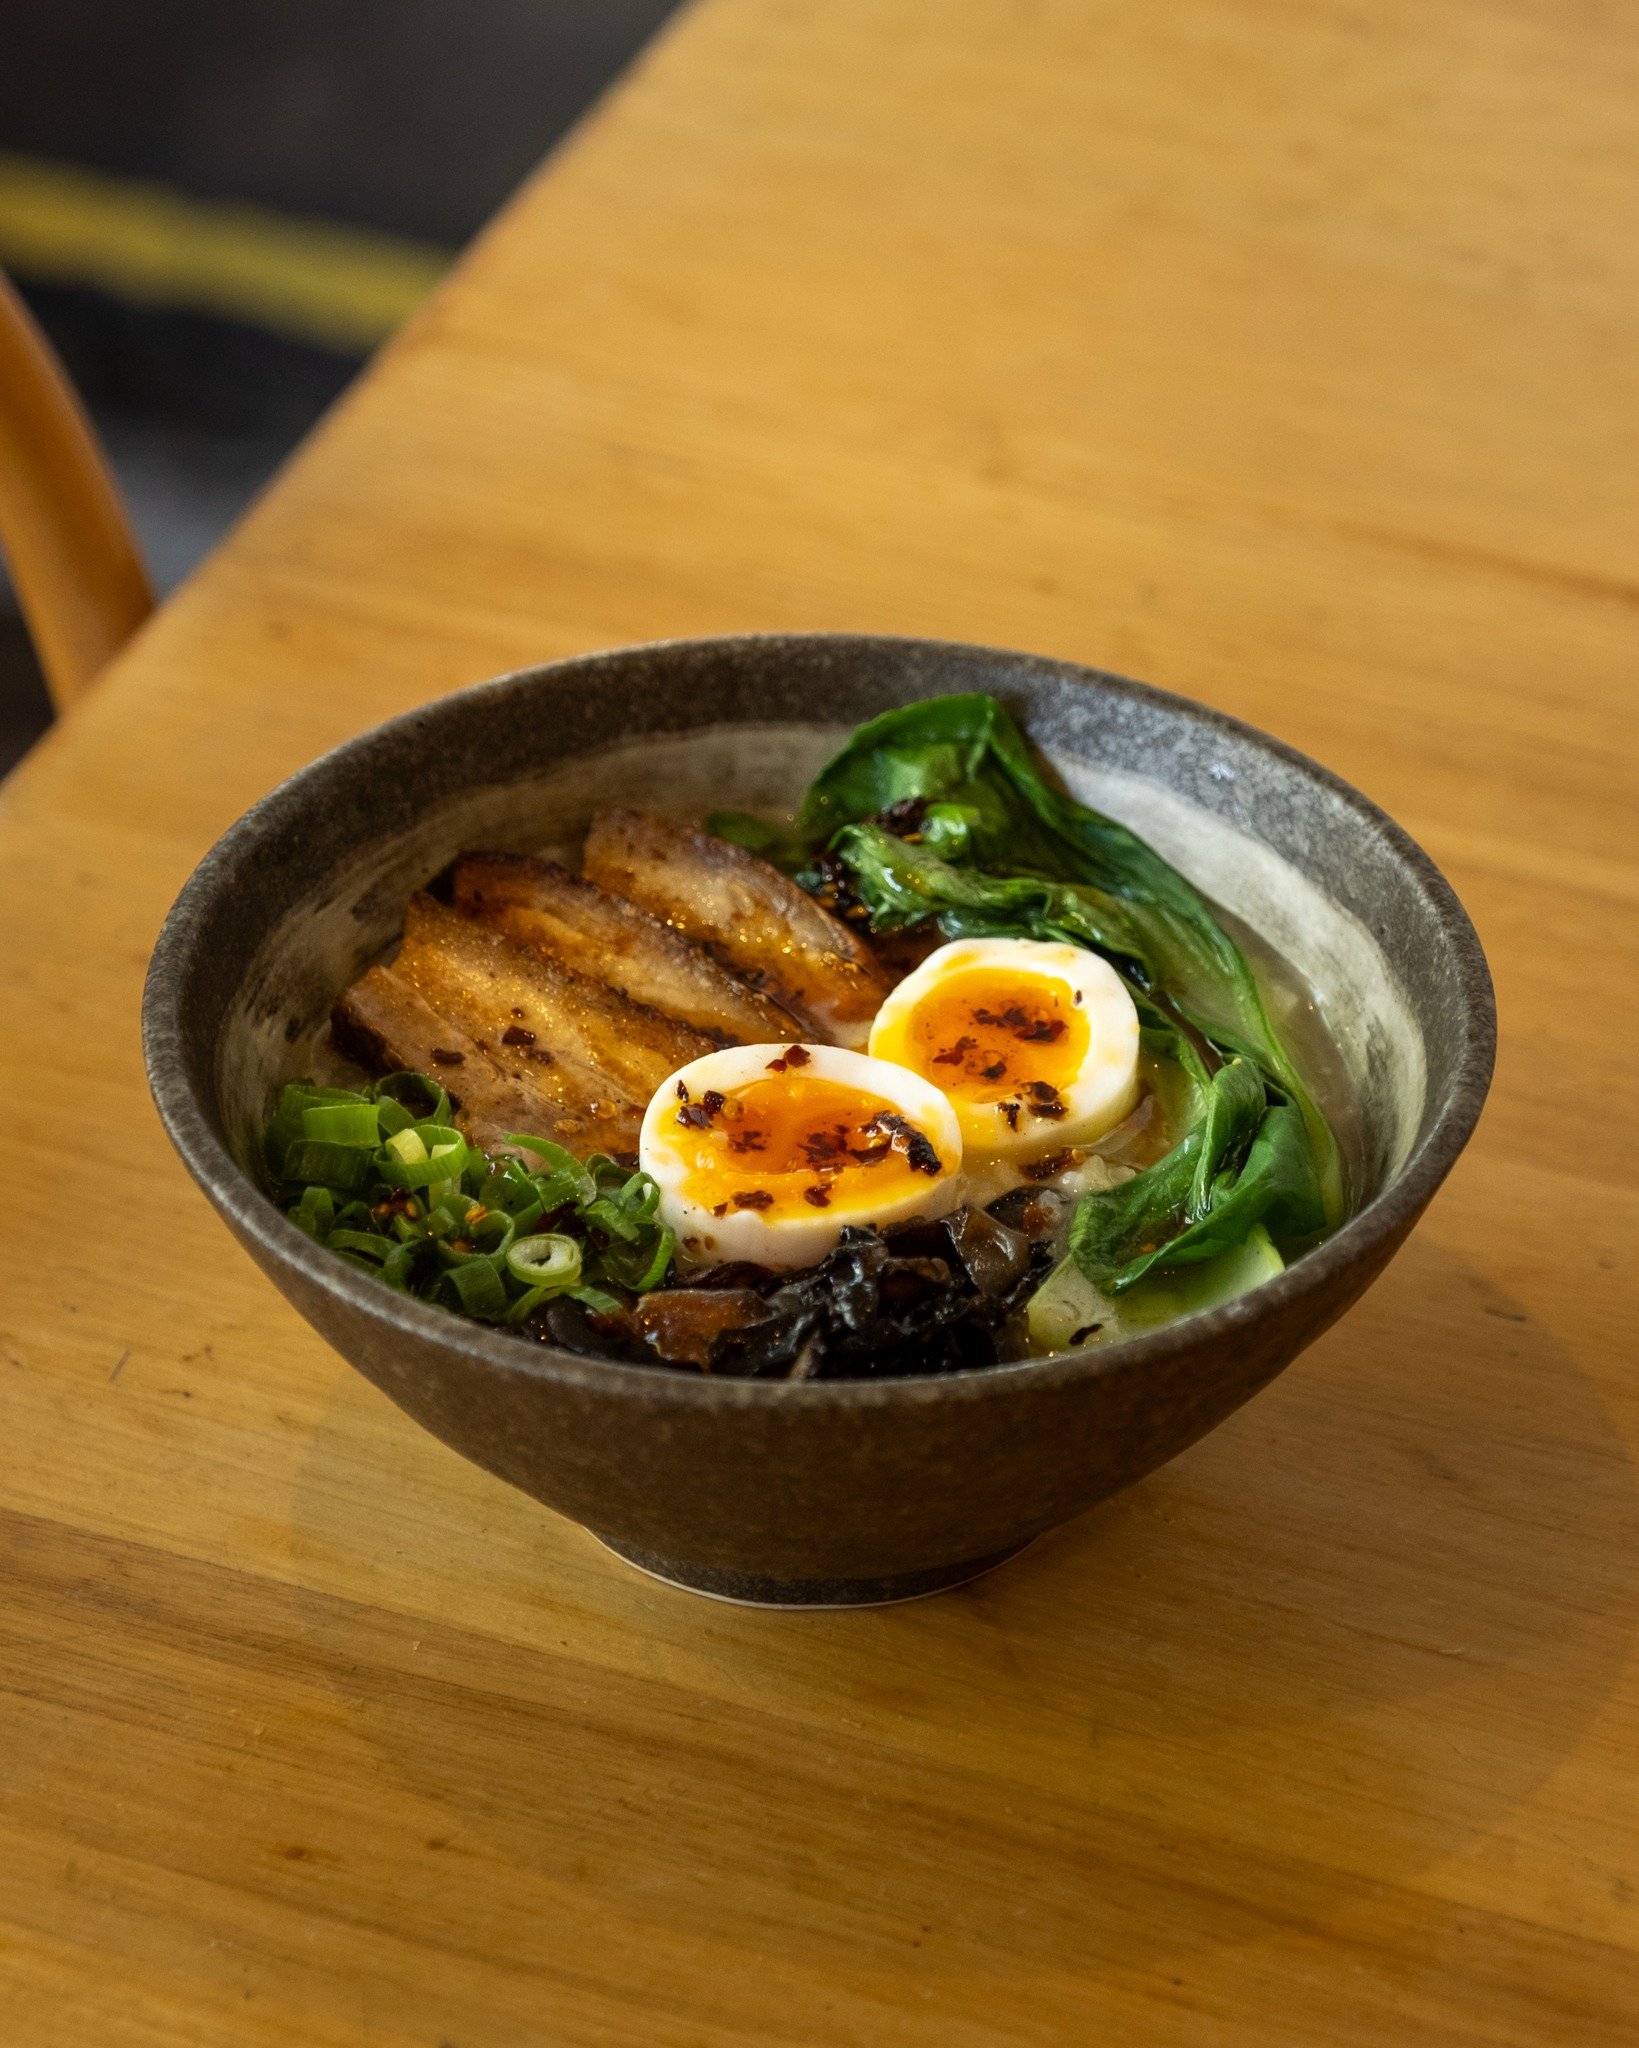 Warm up with a comforting bowl of lemongrass-ginger congee, pork belly, mushrooms, soft egg, gai lan, green onions, and a hint of chili oil&mdash;perfect for chilly days.